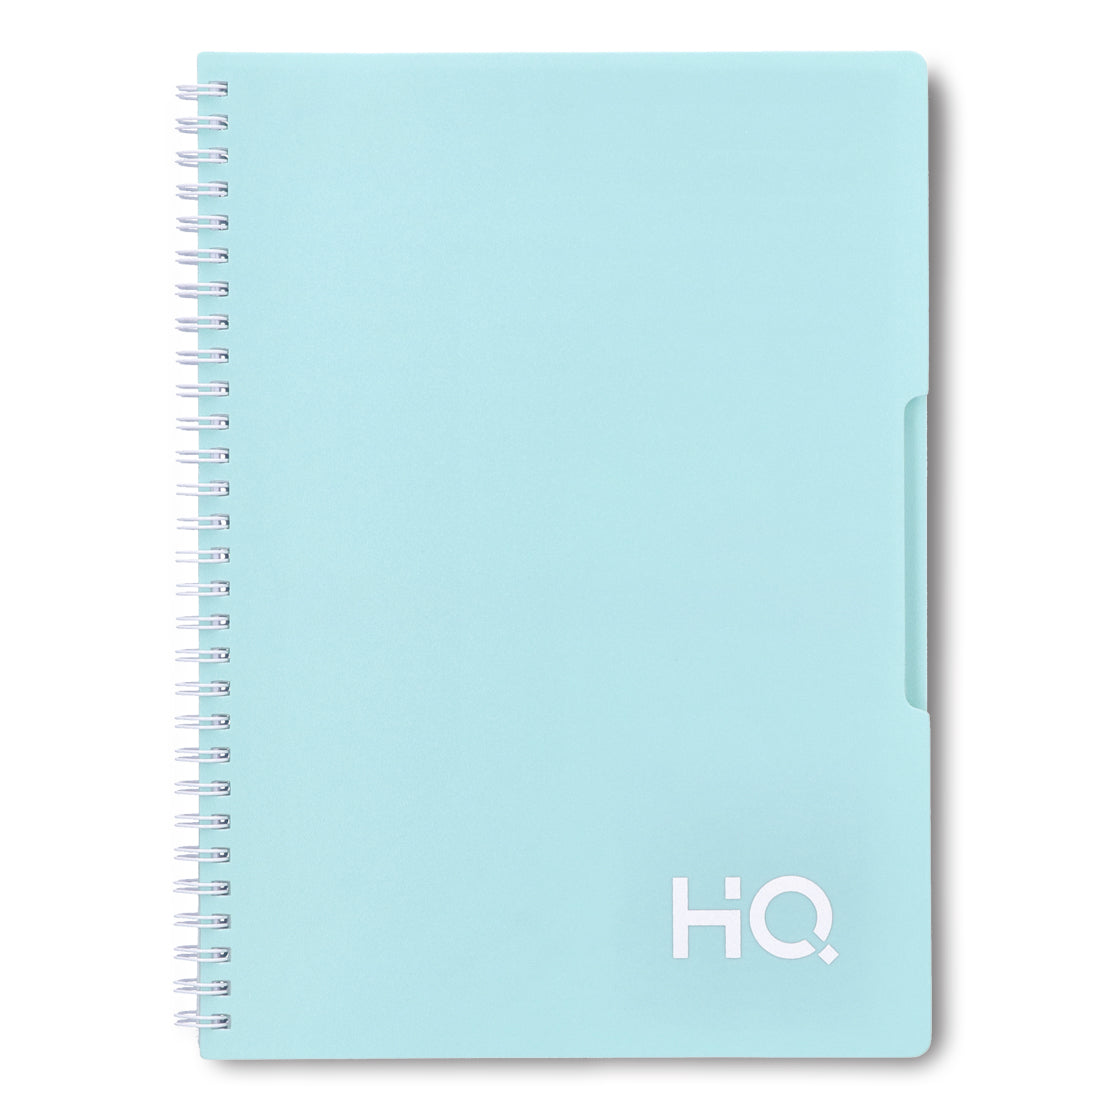 Navneet HQ | Single Subject Book - Mint Green with PP cover | For office and personal use | Wiro / Spiral Bound | Single Line | A5 Size - 14.8 cm x 21 cm | 160 Pages | Pack of 1